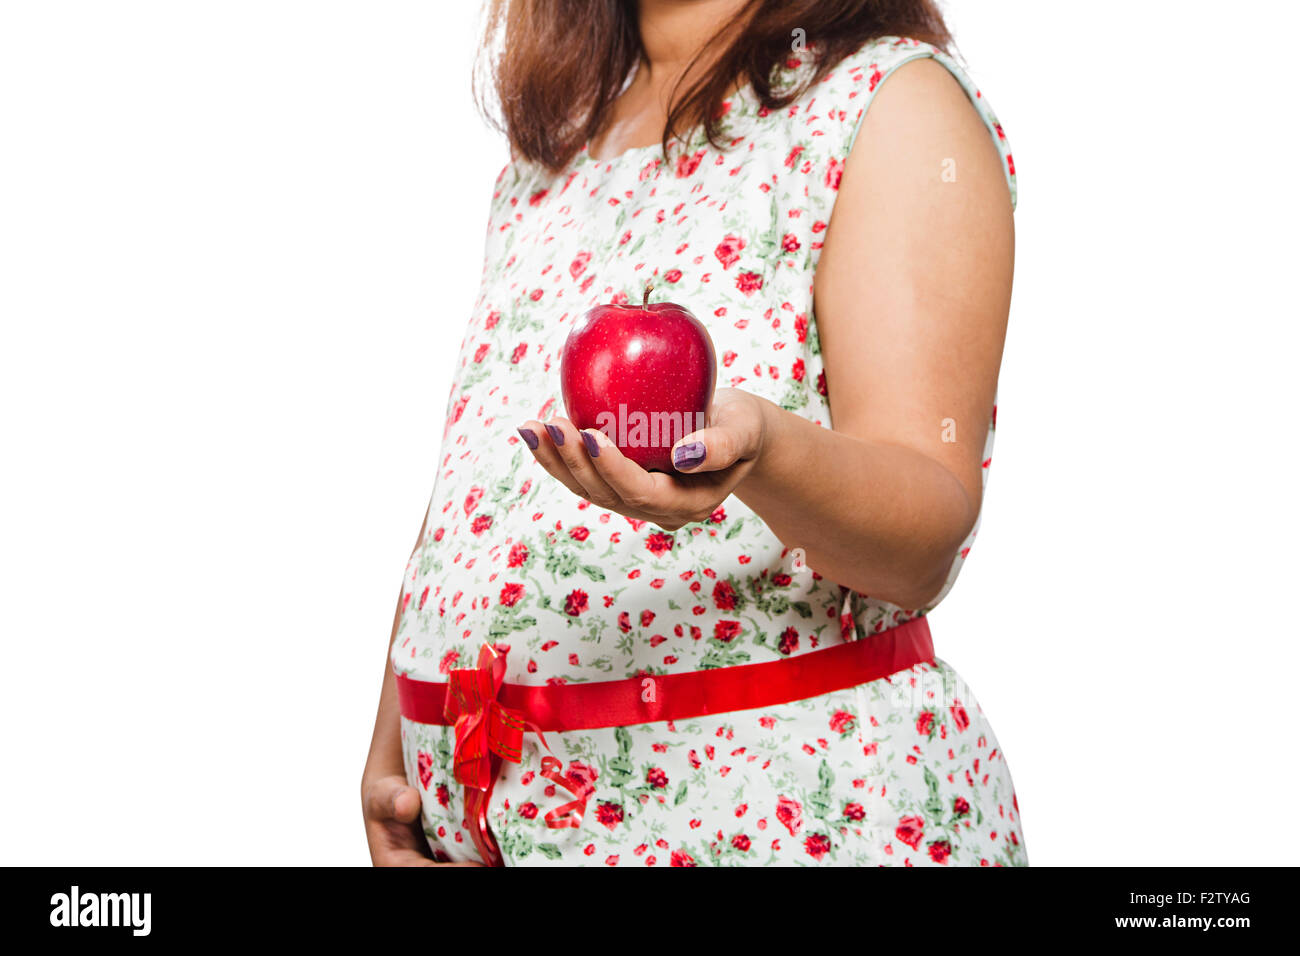 1 Adult Woman Pregnant Self-Care Eating Apple Stock Photo